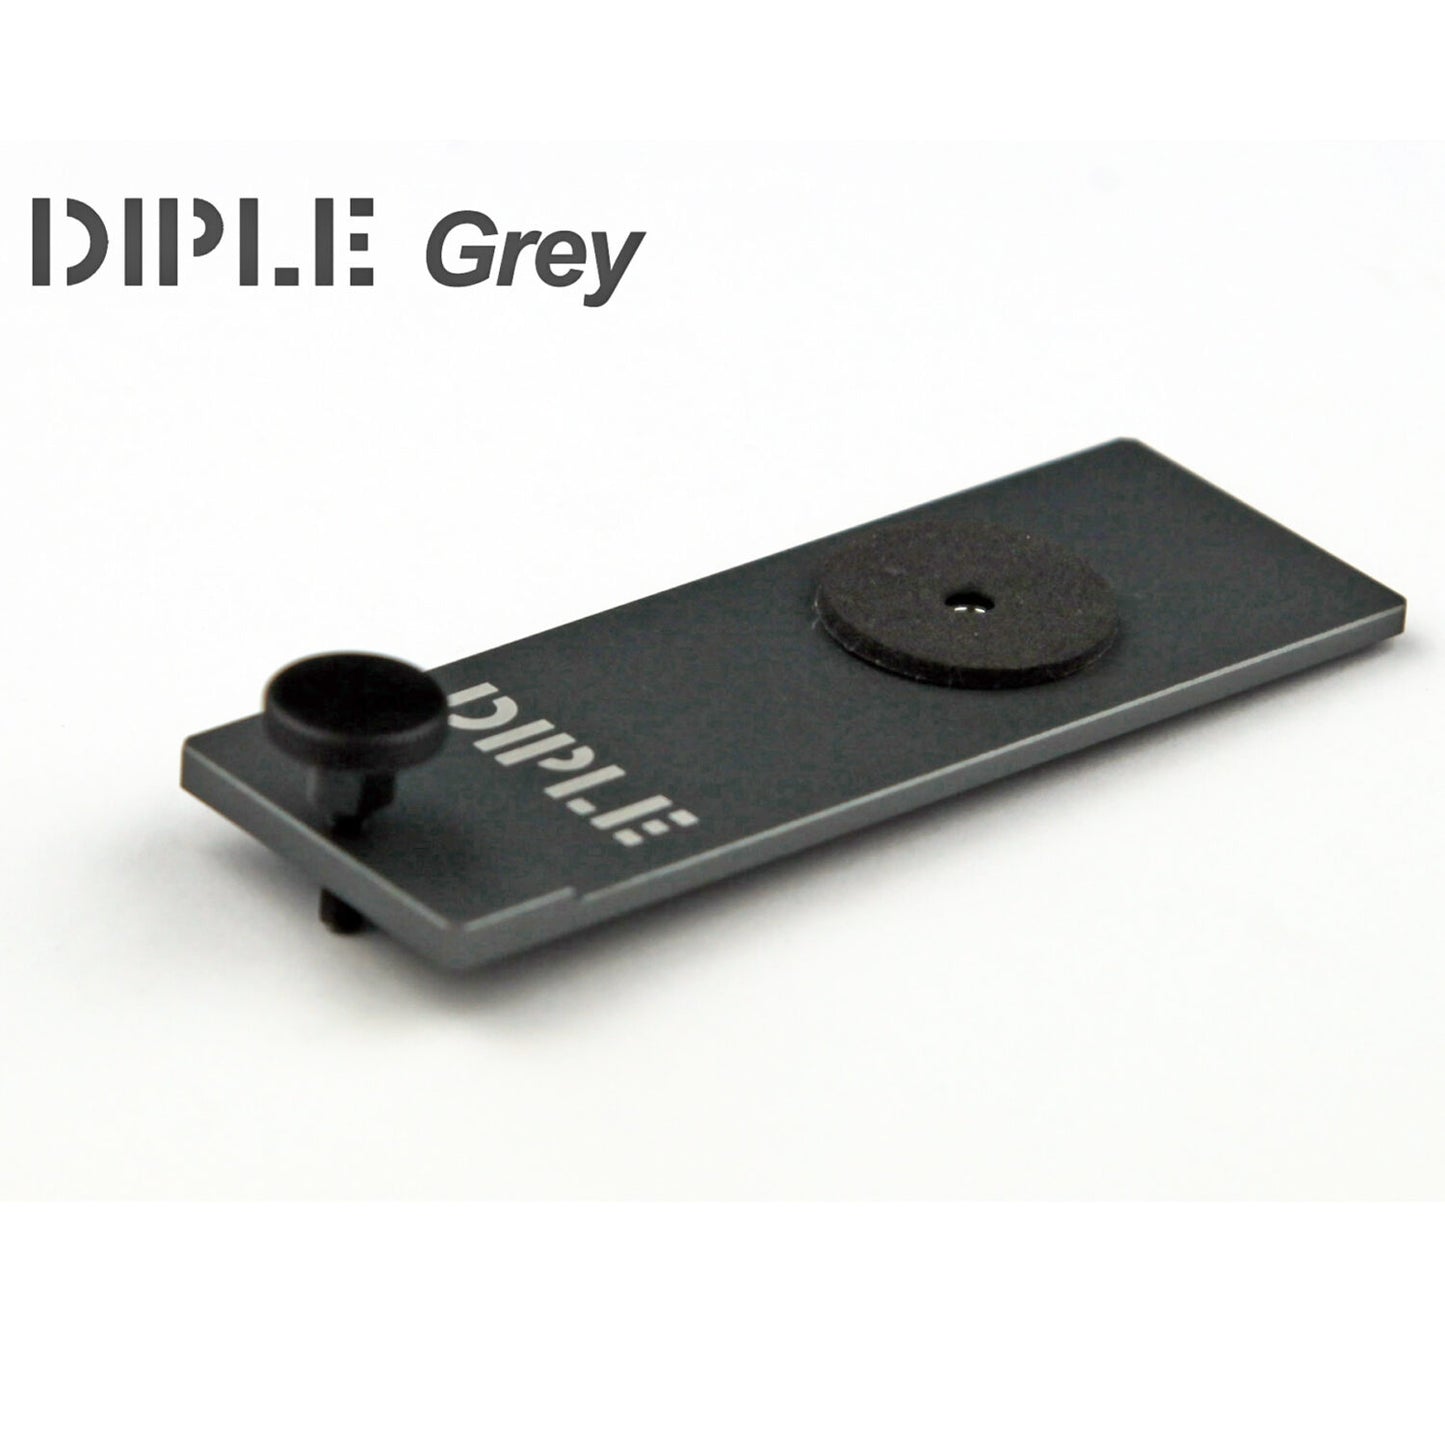 DIPLE Revolutionary microscope for your smartphone (Standard stage)